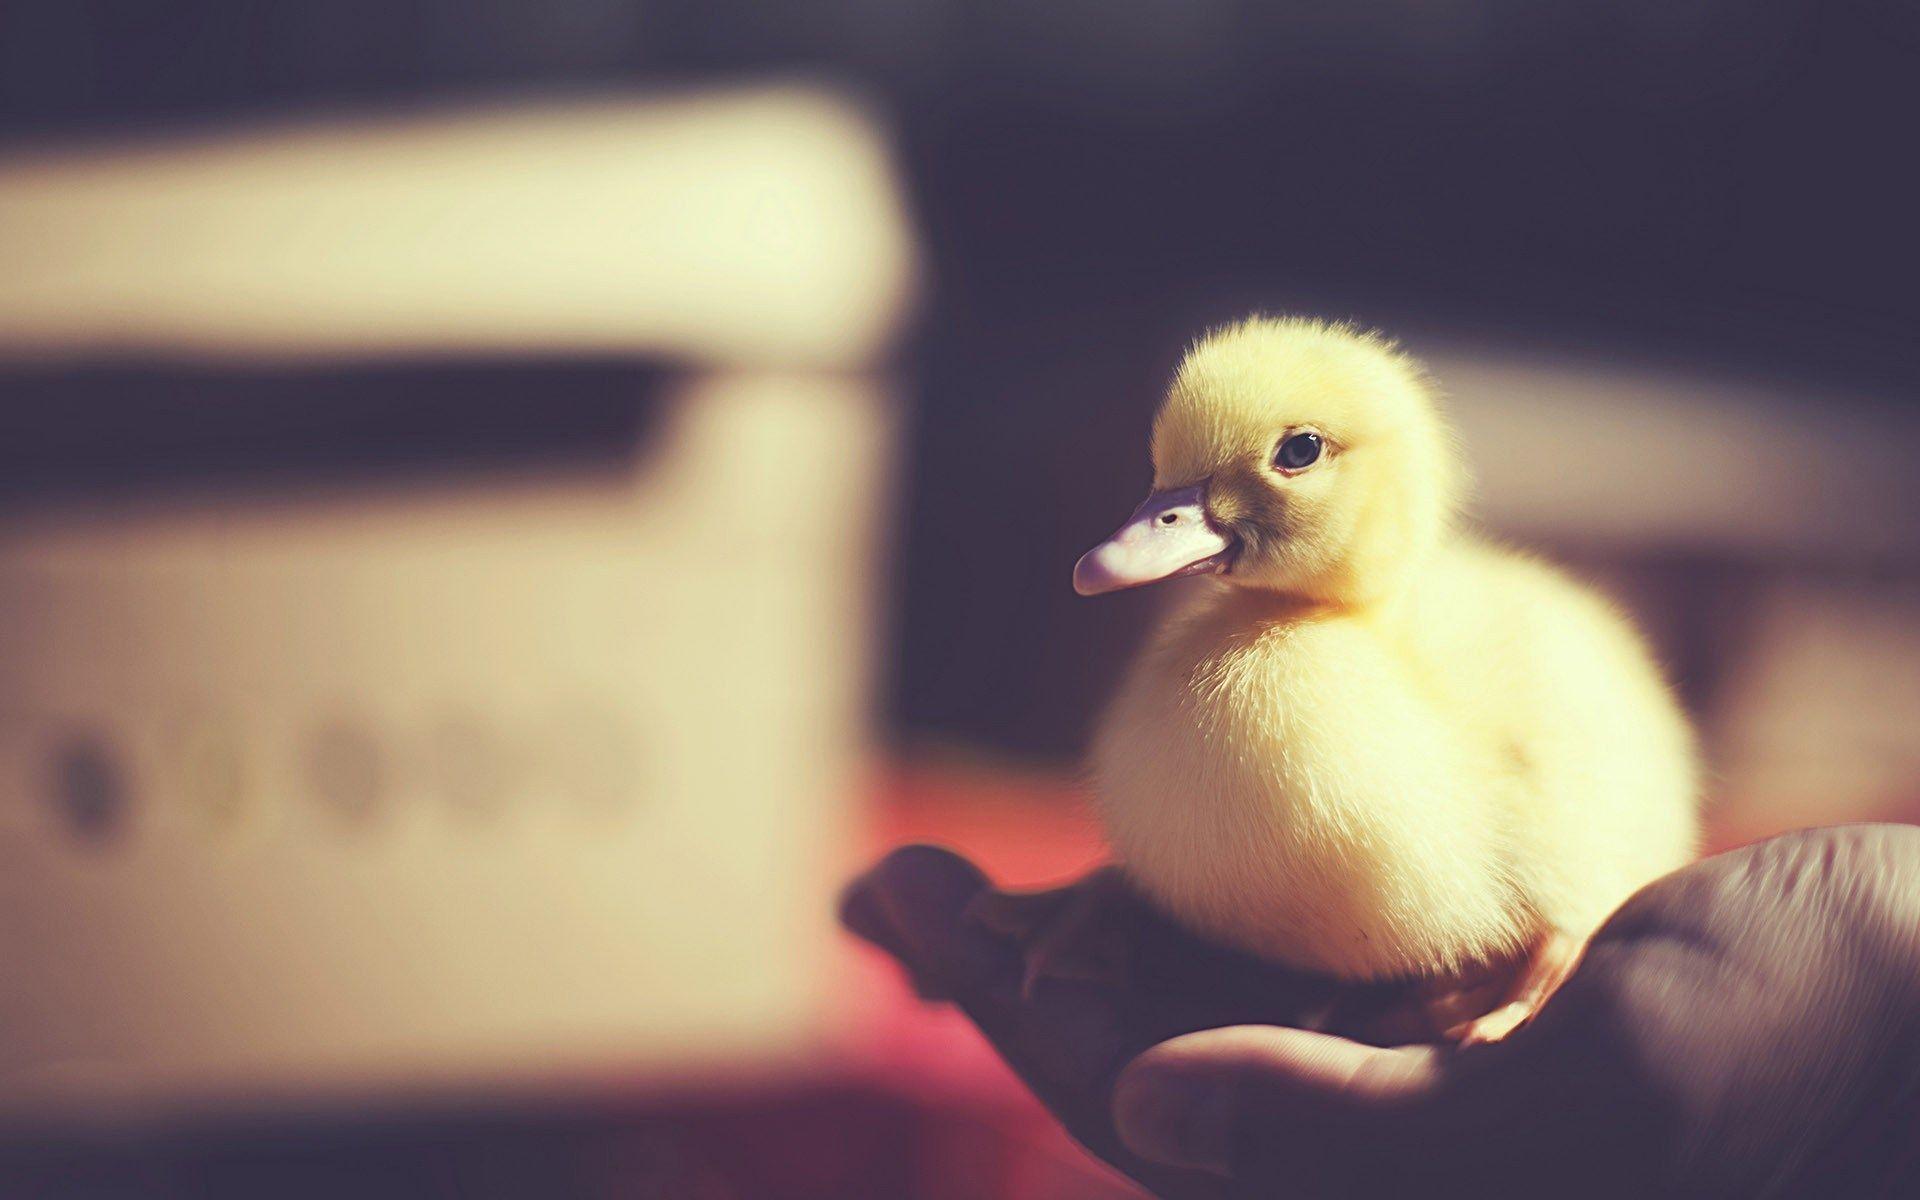 A duckling sitting on a person's hand - Duck